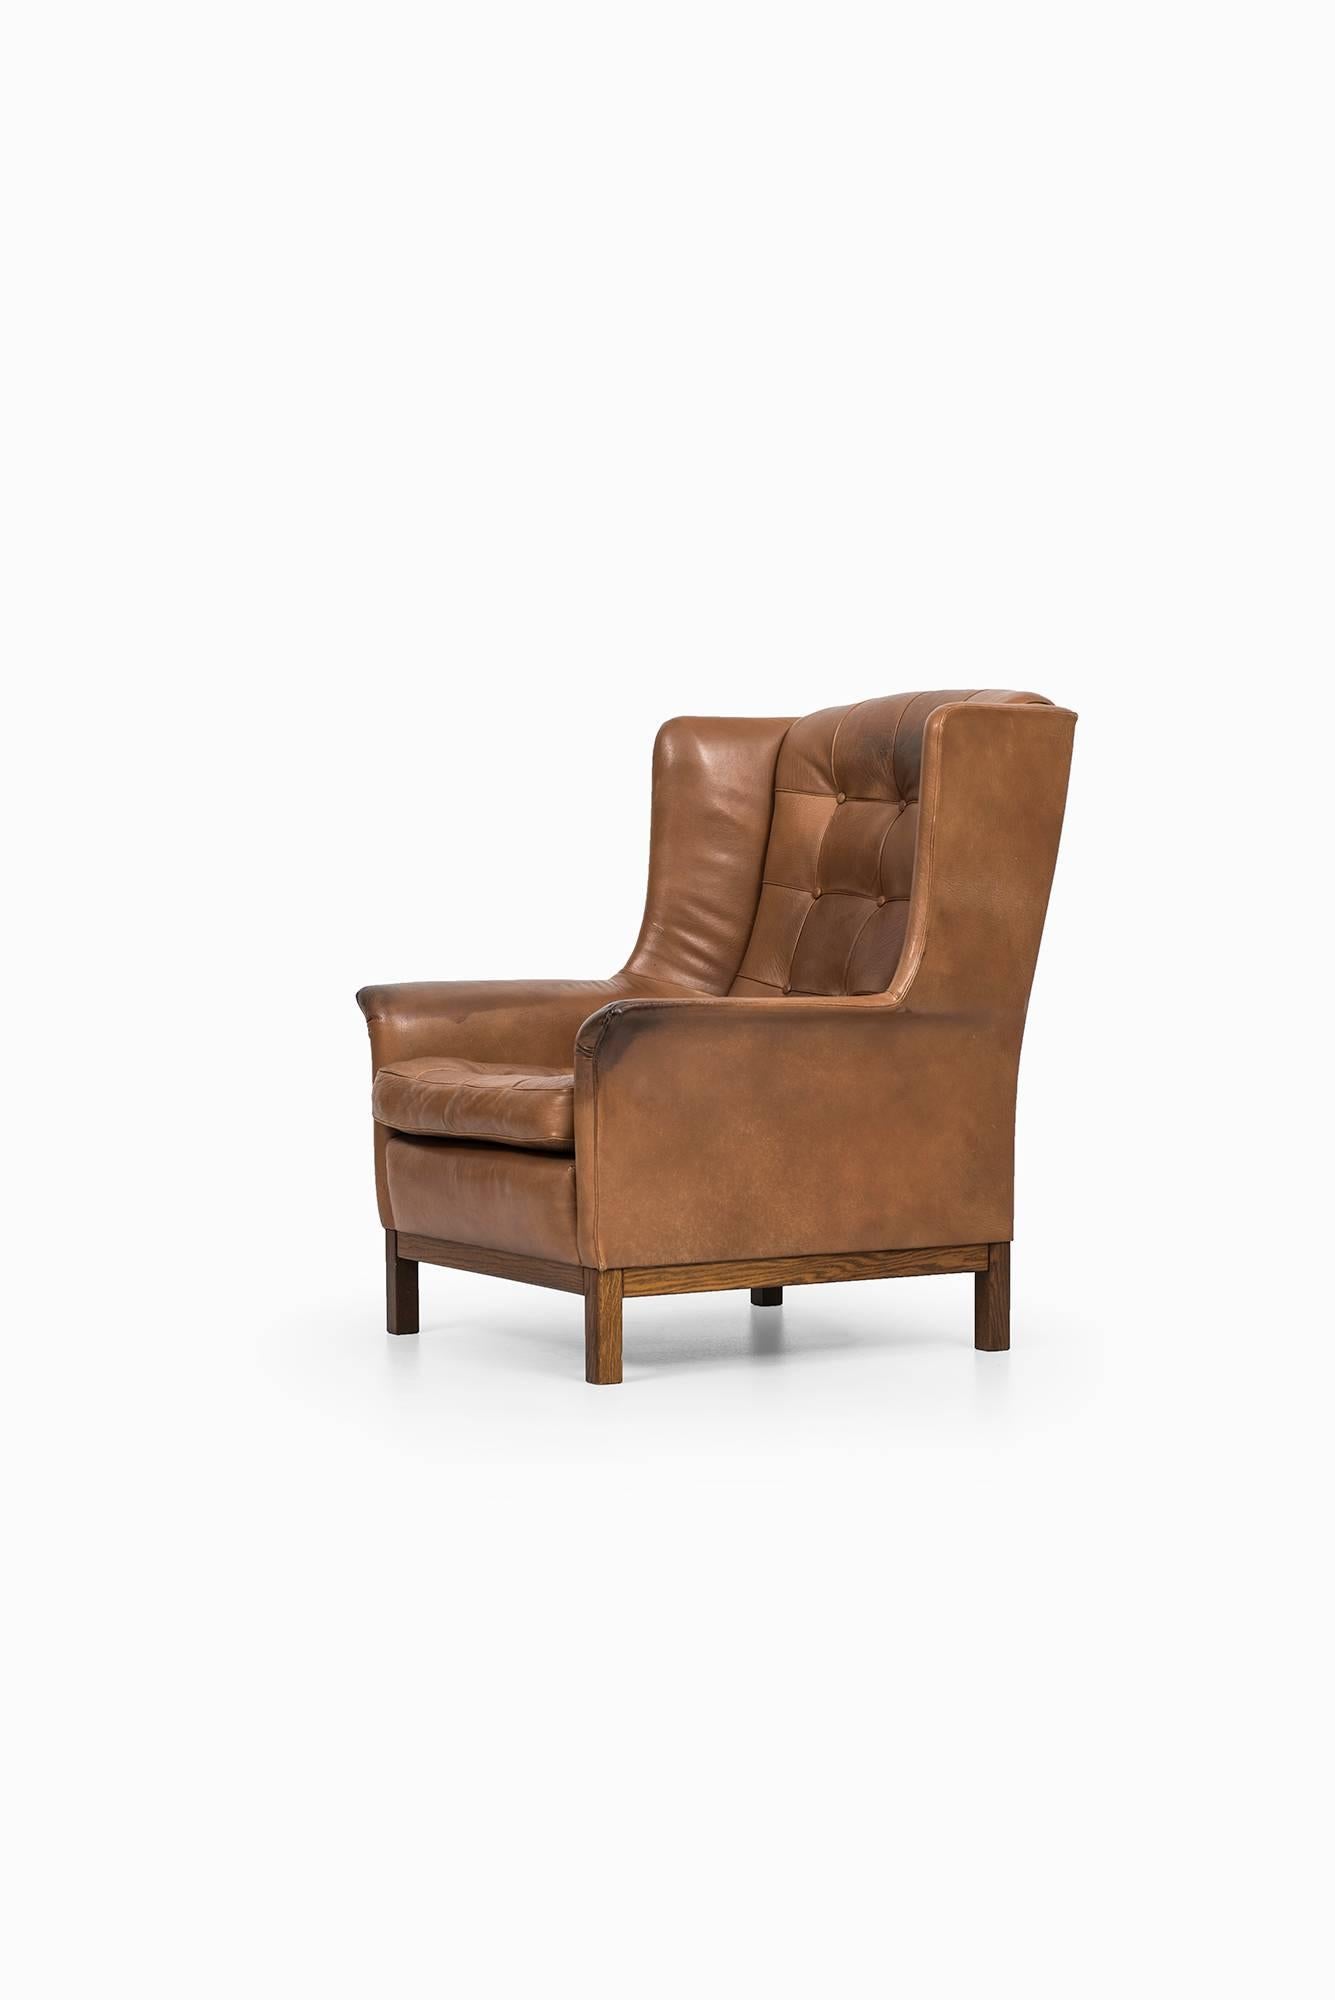 Mid-20th Century Arne Norell Easy Chair Produced by Arne Norell AB in Sweden